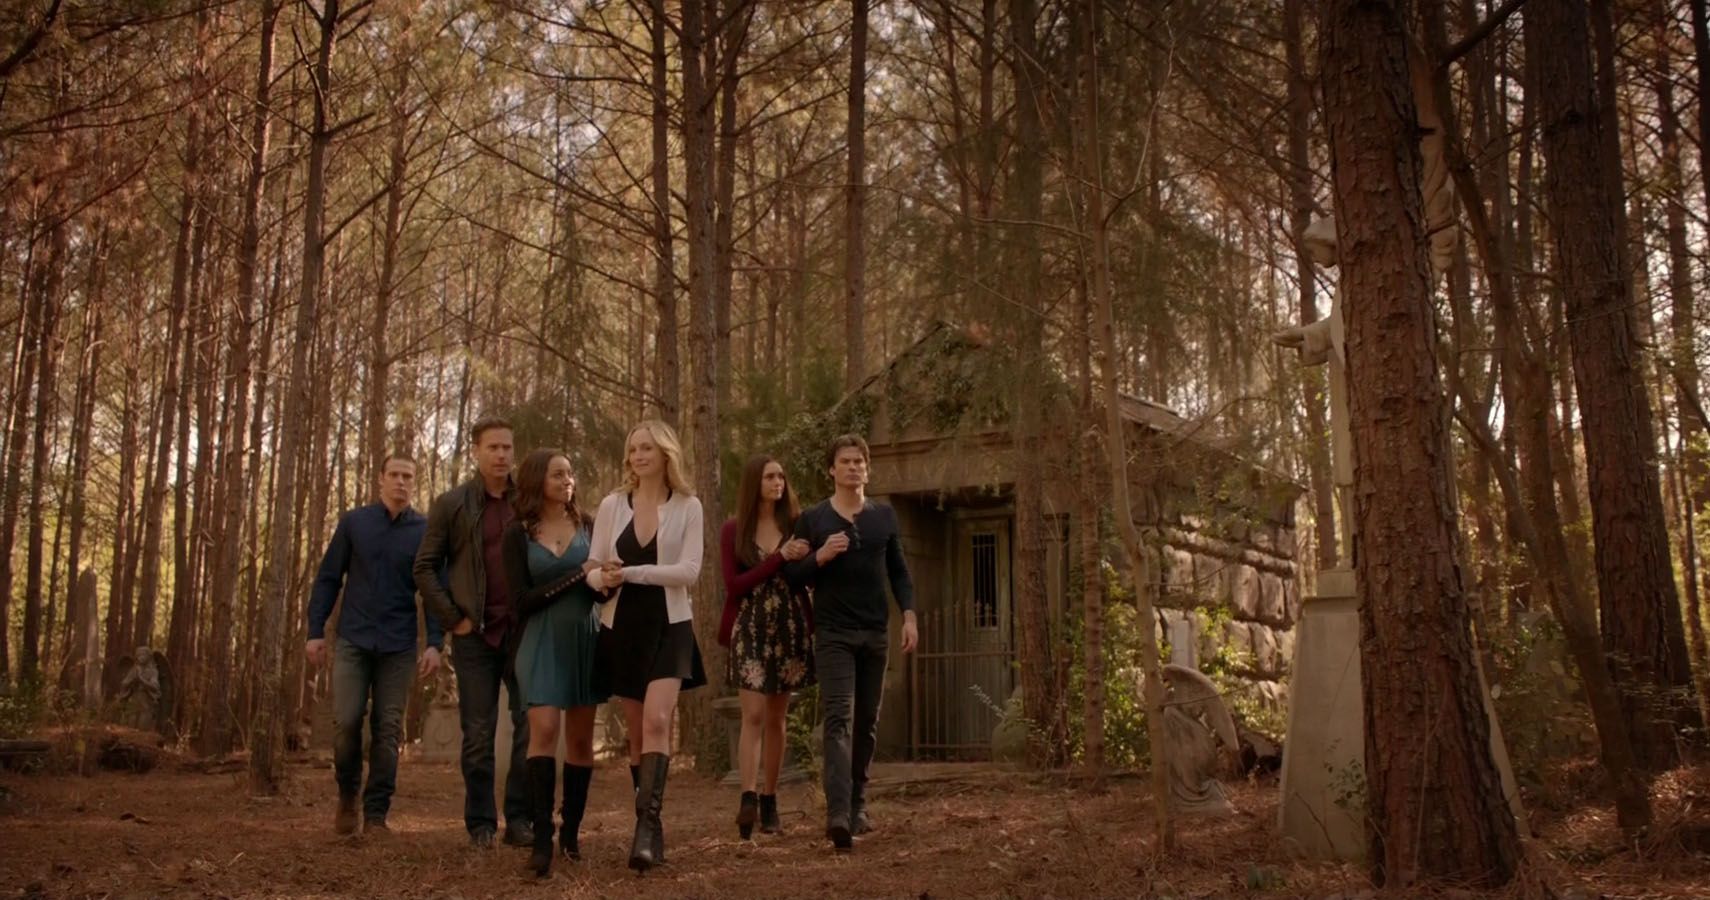 The Vampire Diaries 10 Hidden Details About Mystic Falls You Didn't Notice